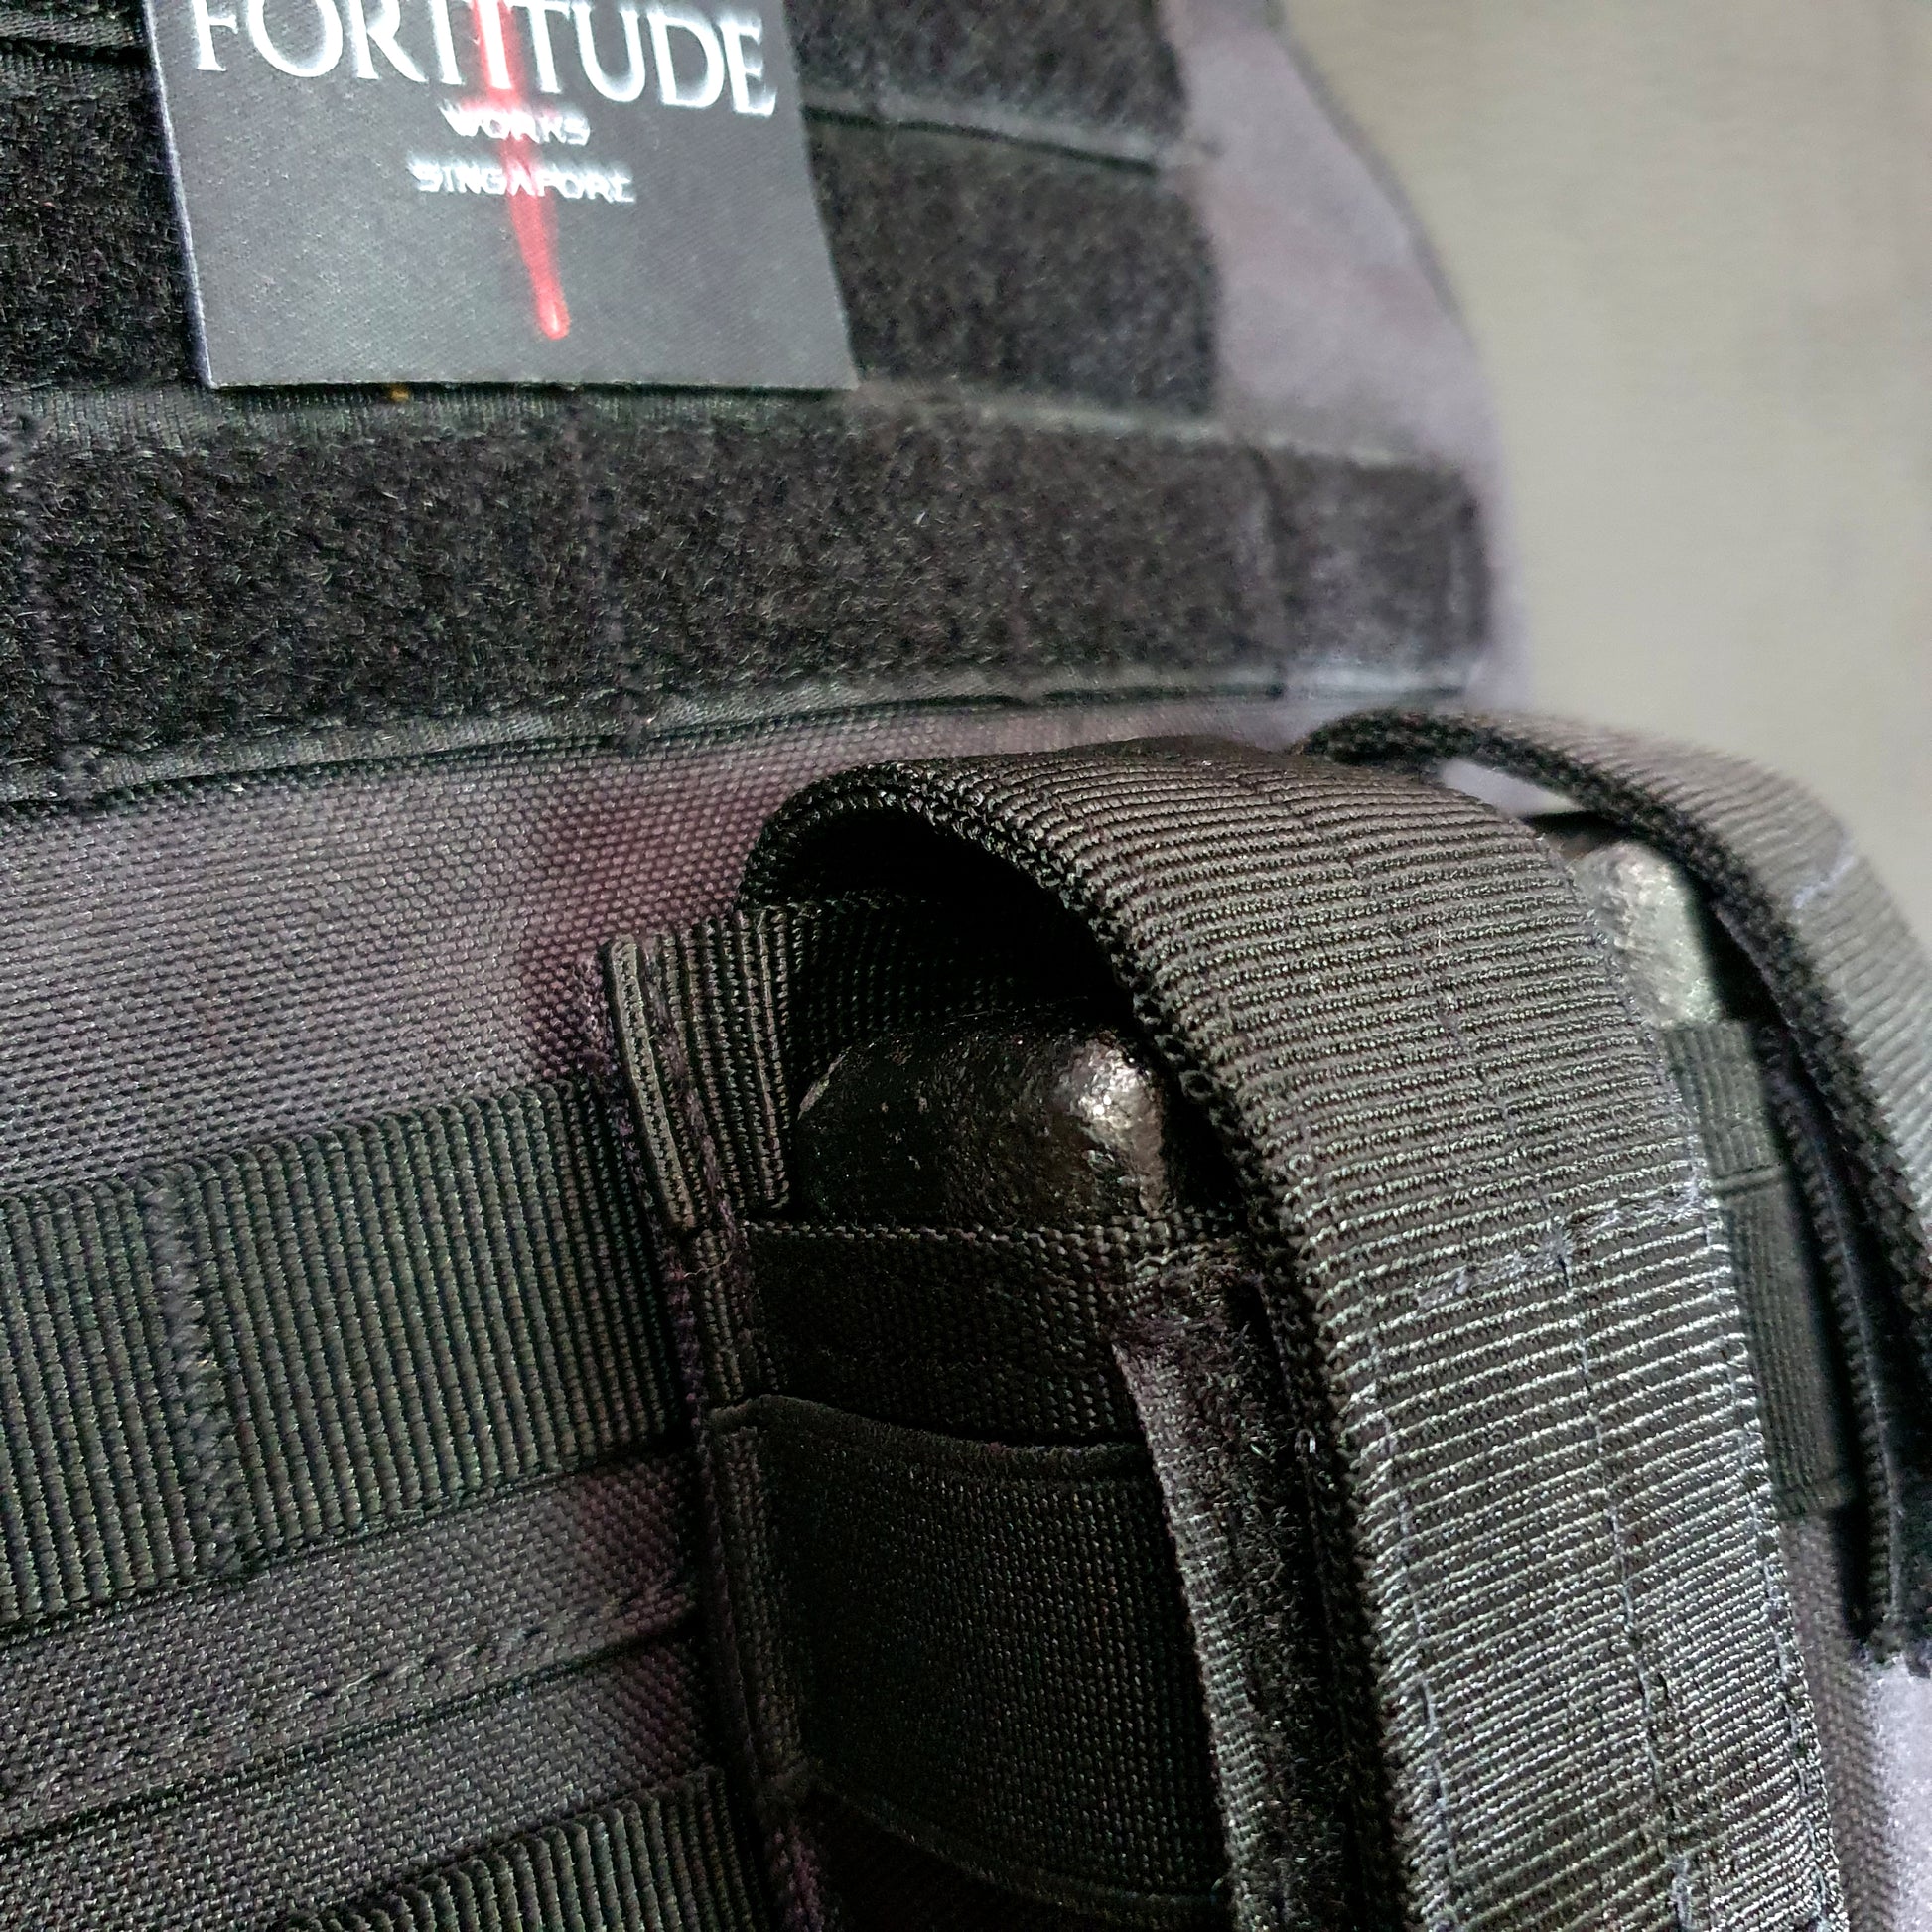 AUXILIARY WEIGHT BLOCK (1KG) - FORTITUDE WORKS SINGAPORE